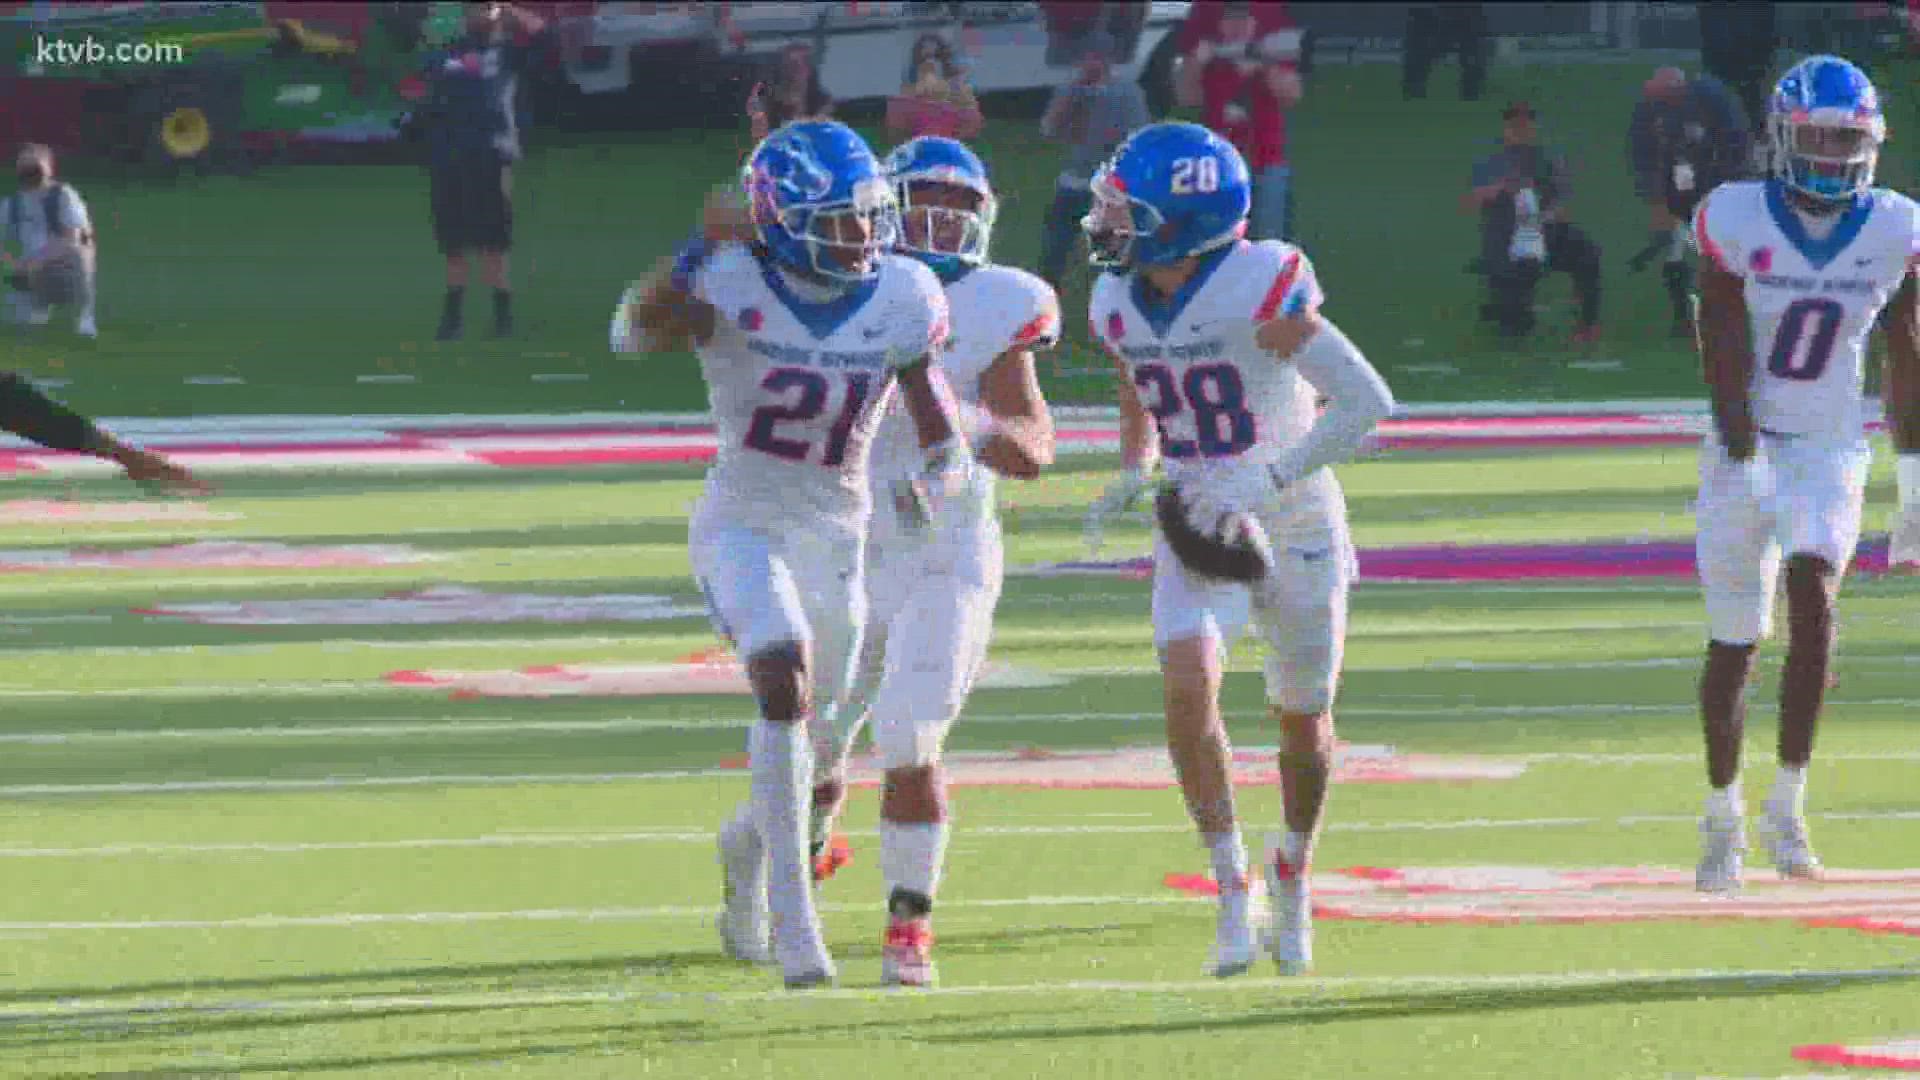 KTVB Sports Director Jay Tust shares highlights from the Broncos' win against the Bulldogs on Saturday.